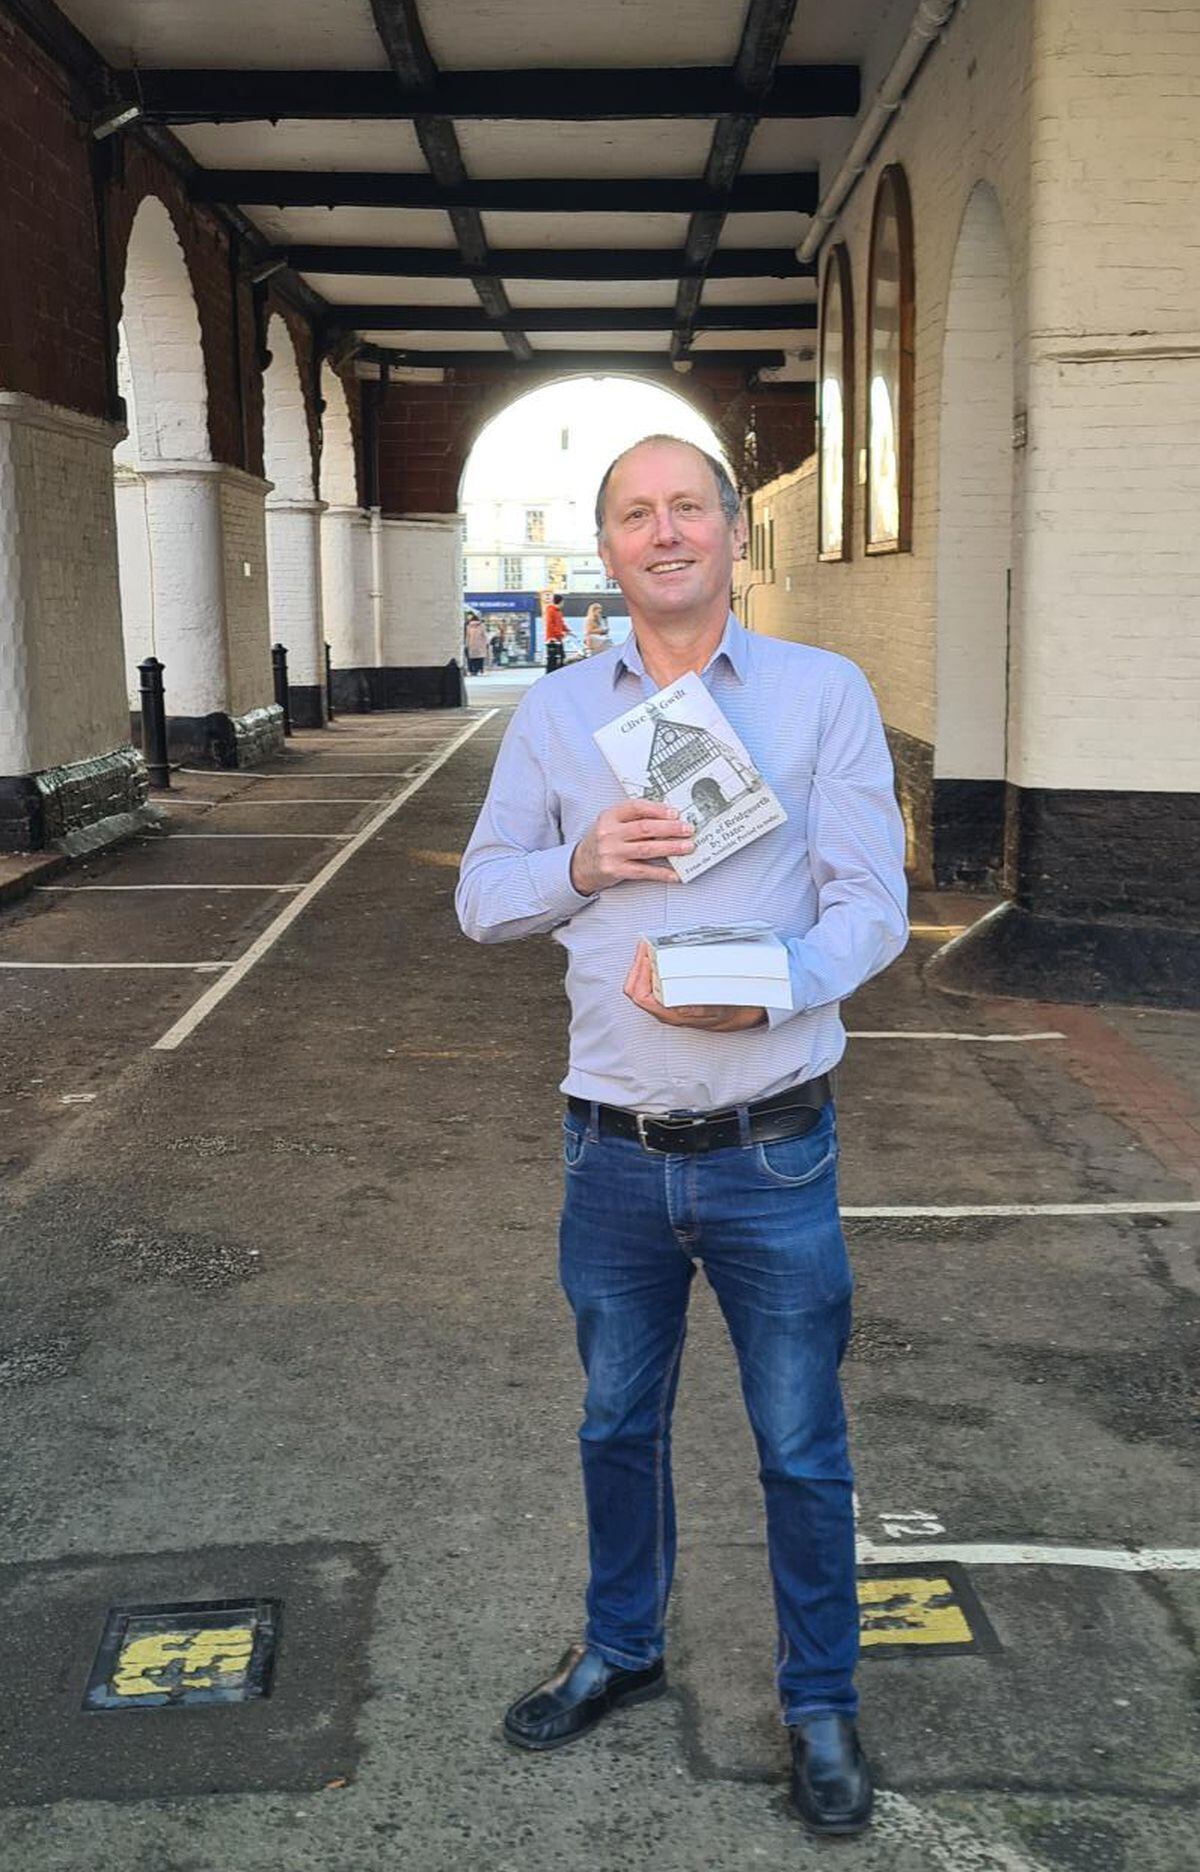 Clive by Bridgnorth Town Hall with his latest book.